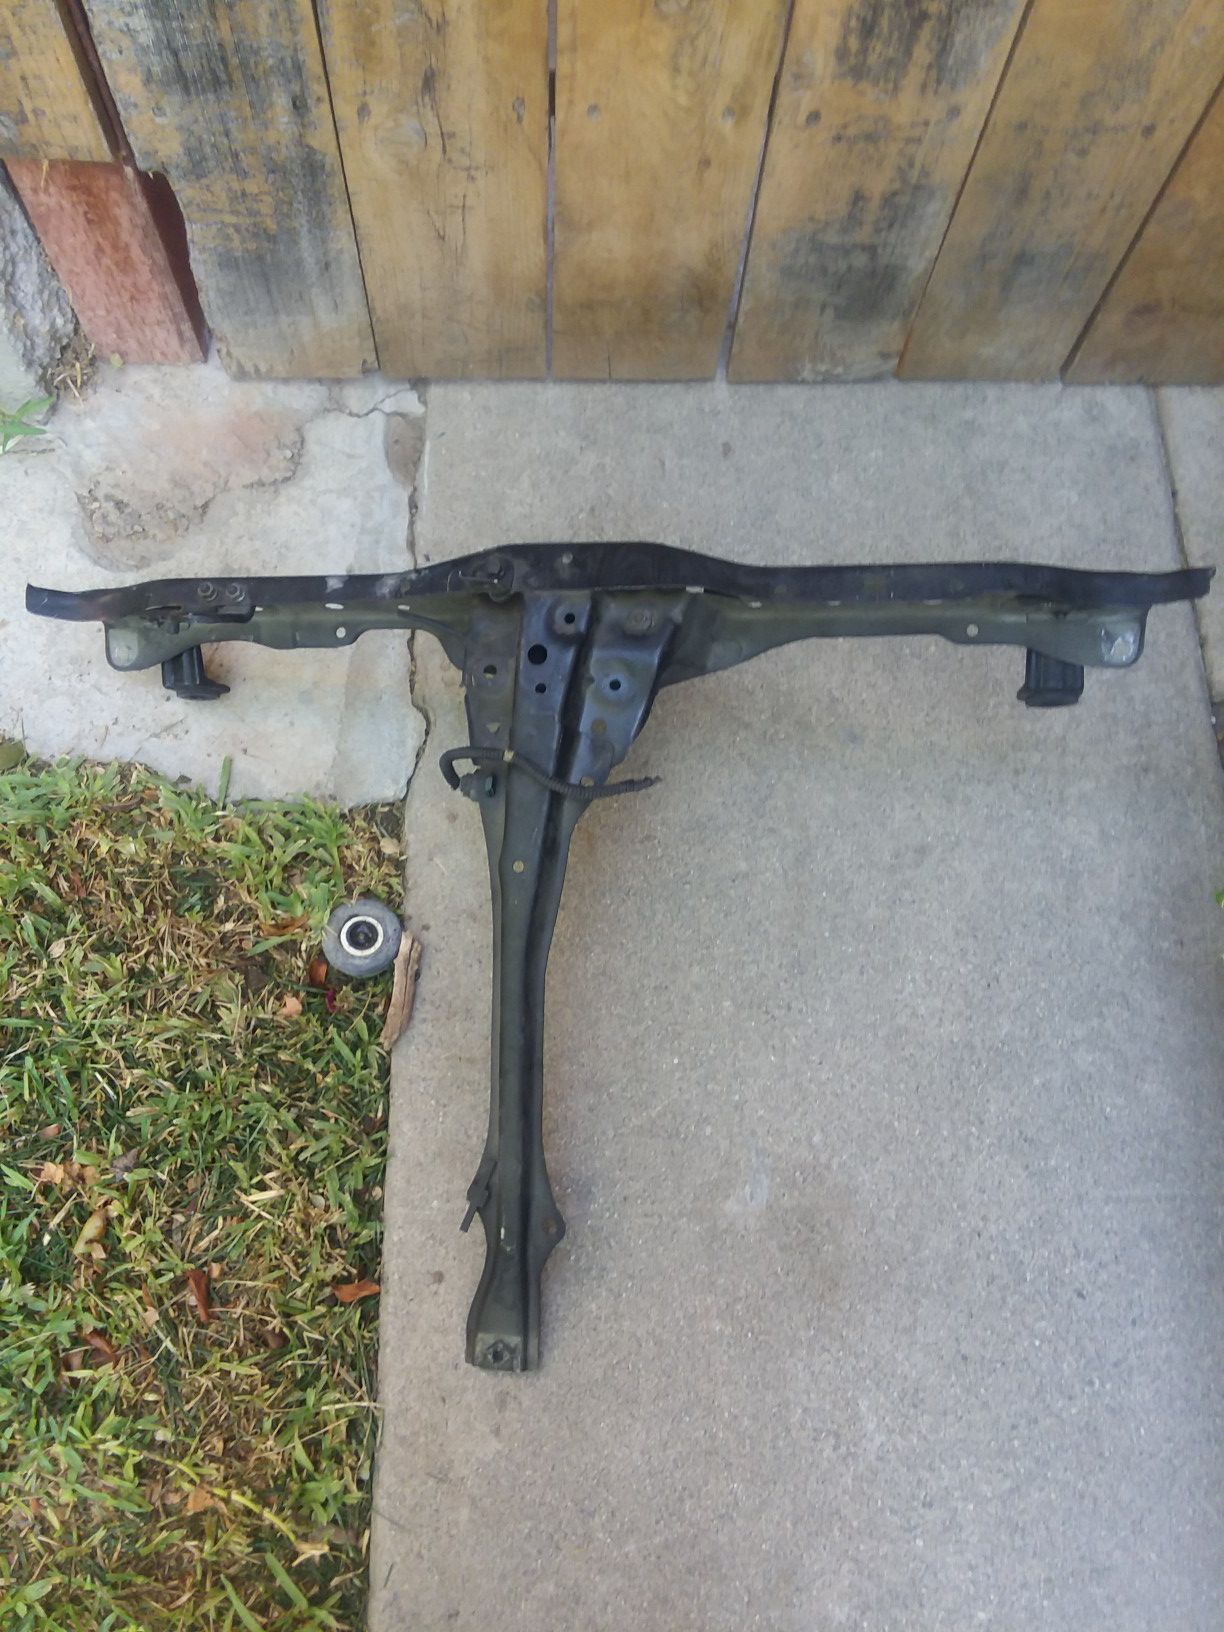 ACURA RSX 2001 - 2006 T BAR GOOD WORKING CONDITION JUST 2 LITTLE CRACKS CHECK PICS INCLUDES RADIATOR BRACKETS AND LATCH $120